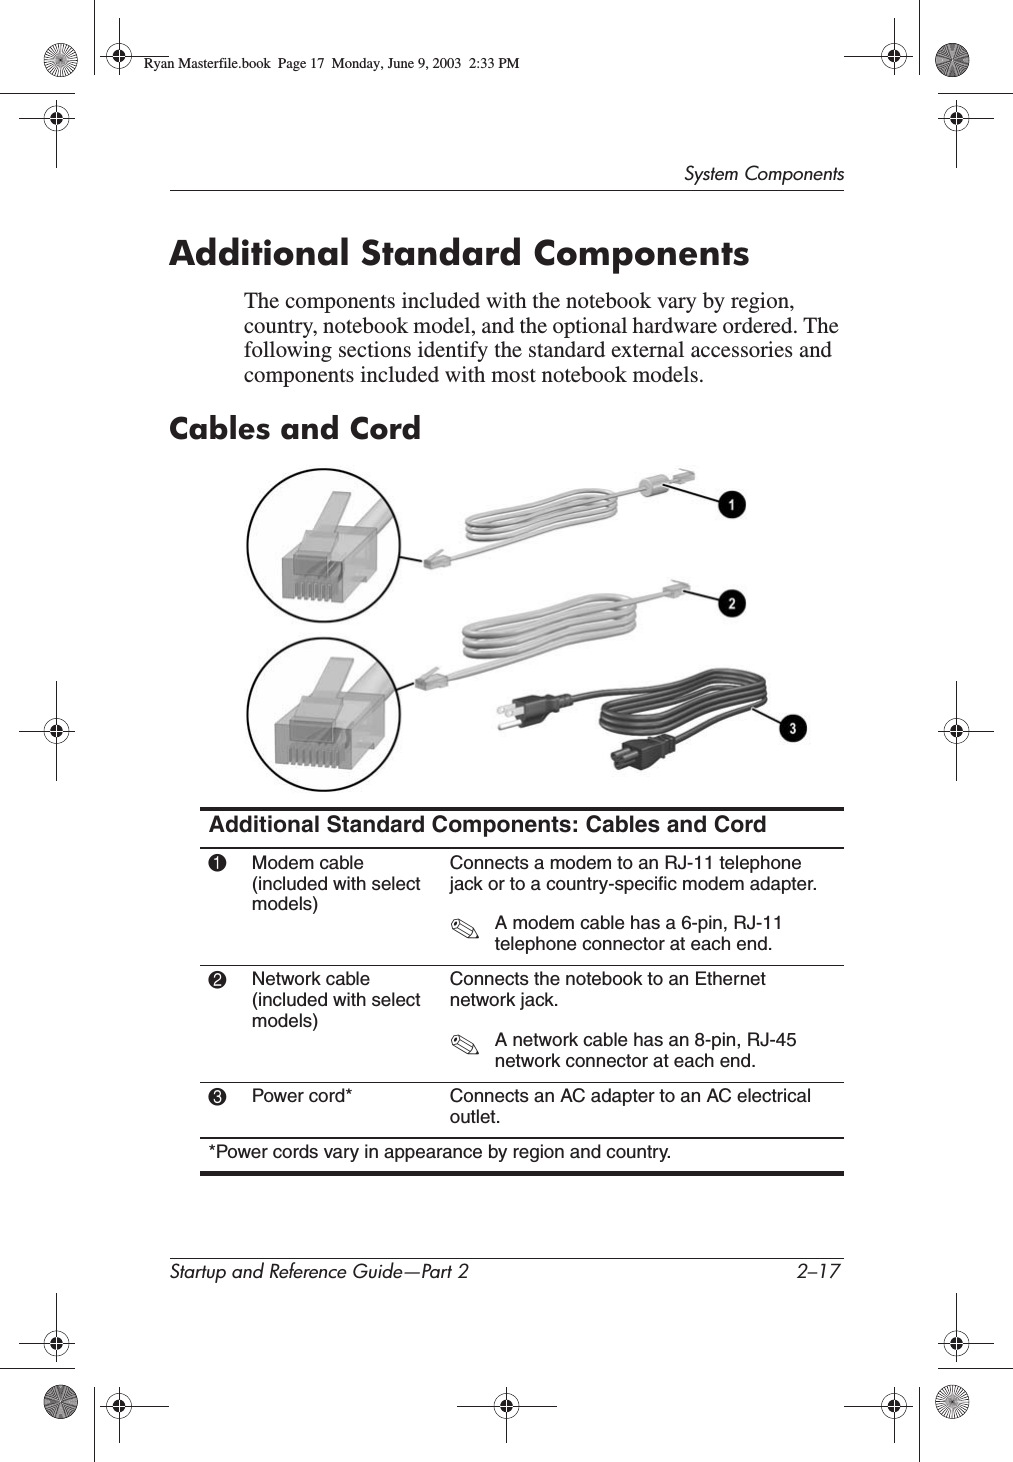 System ComponentsStartup and Reference Guide—Part 2 2–17Additional Standard ComponentsThe components included with the notebook vary by region, country, notebook model, and the optional hardware ordered. The following sections identify the standard external accessories and components included with most notebook models.Cables and CordAdditional Standard Components: Cables and Cord1Modem cable (included with select models)Connects a modem to an RJ-11 telephone jack or to a country-specific modem adapter.✎A modem cable has a 6-pin, RJ-11 telephone connector at each end.2Network cable(included with select models)Connects the notebook to an Ethernet network jack.✎A network cable has an 8-pin, RJ-45 network connector at each end.3Power cord* Connects an AC adapter to an AC electrical outlet.*Power cords vary in appearance by region and country.Ryan Masterfile.book  Page 17  Monday, June 9, 2003  2:33 PM